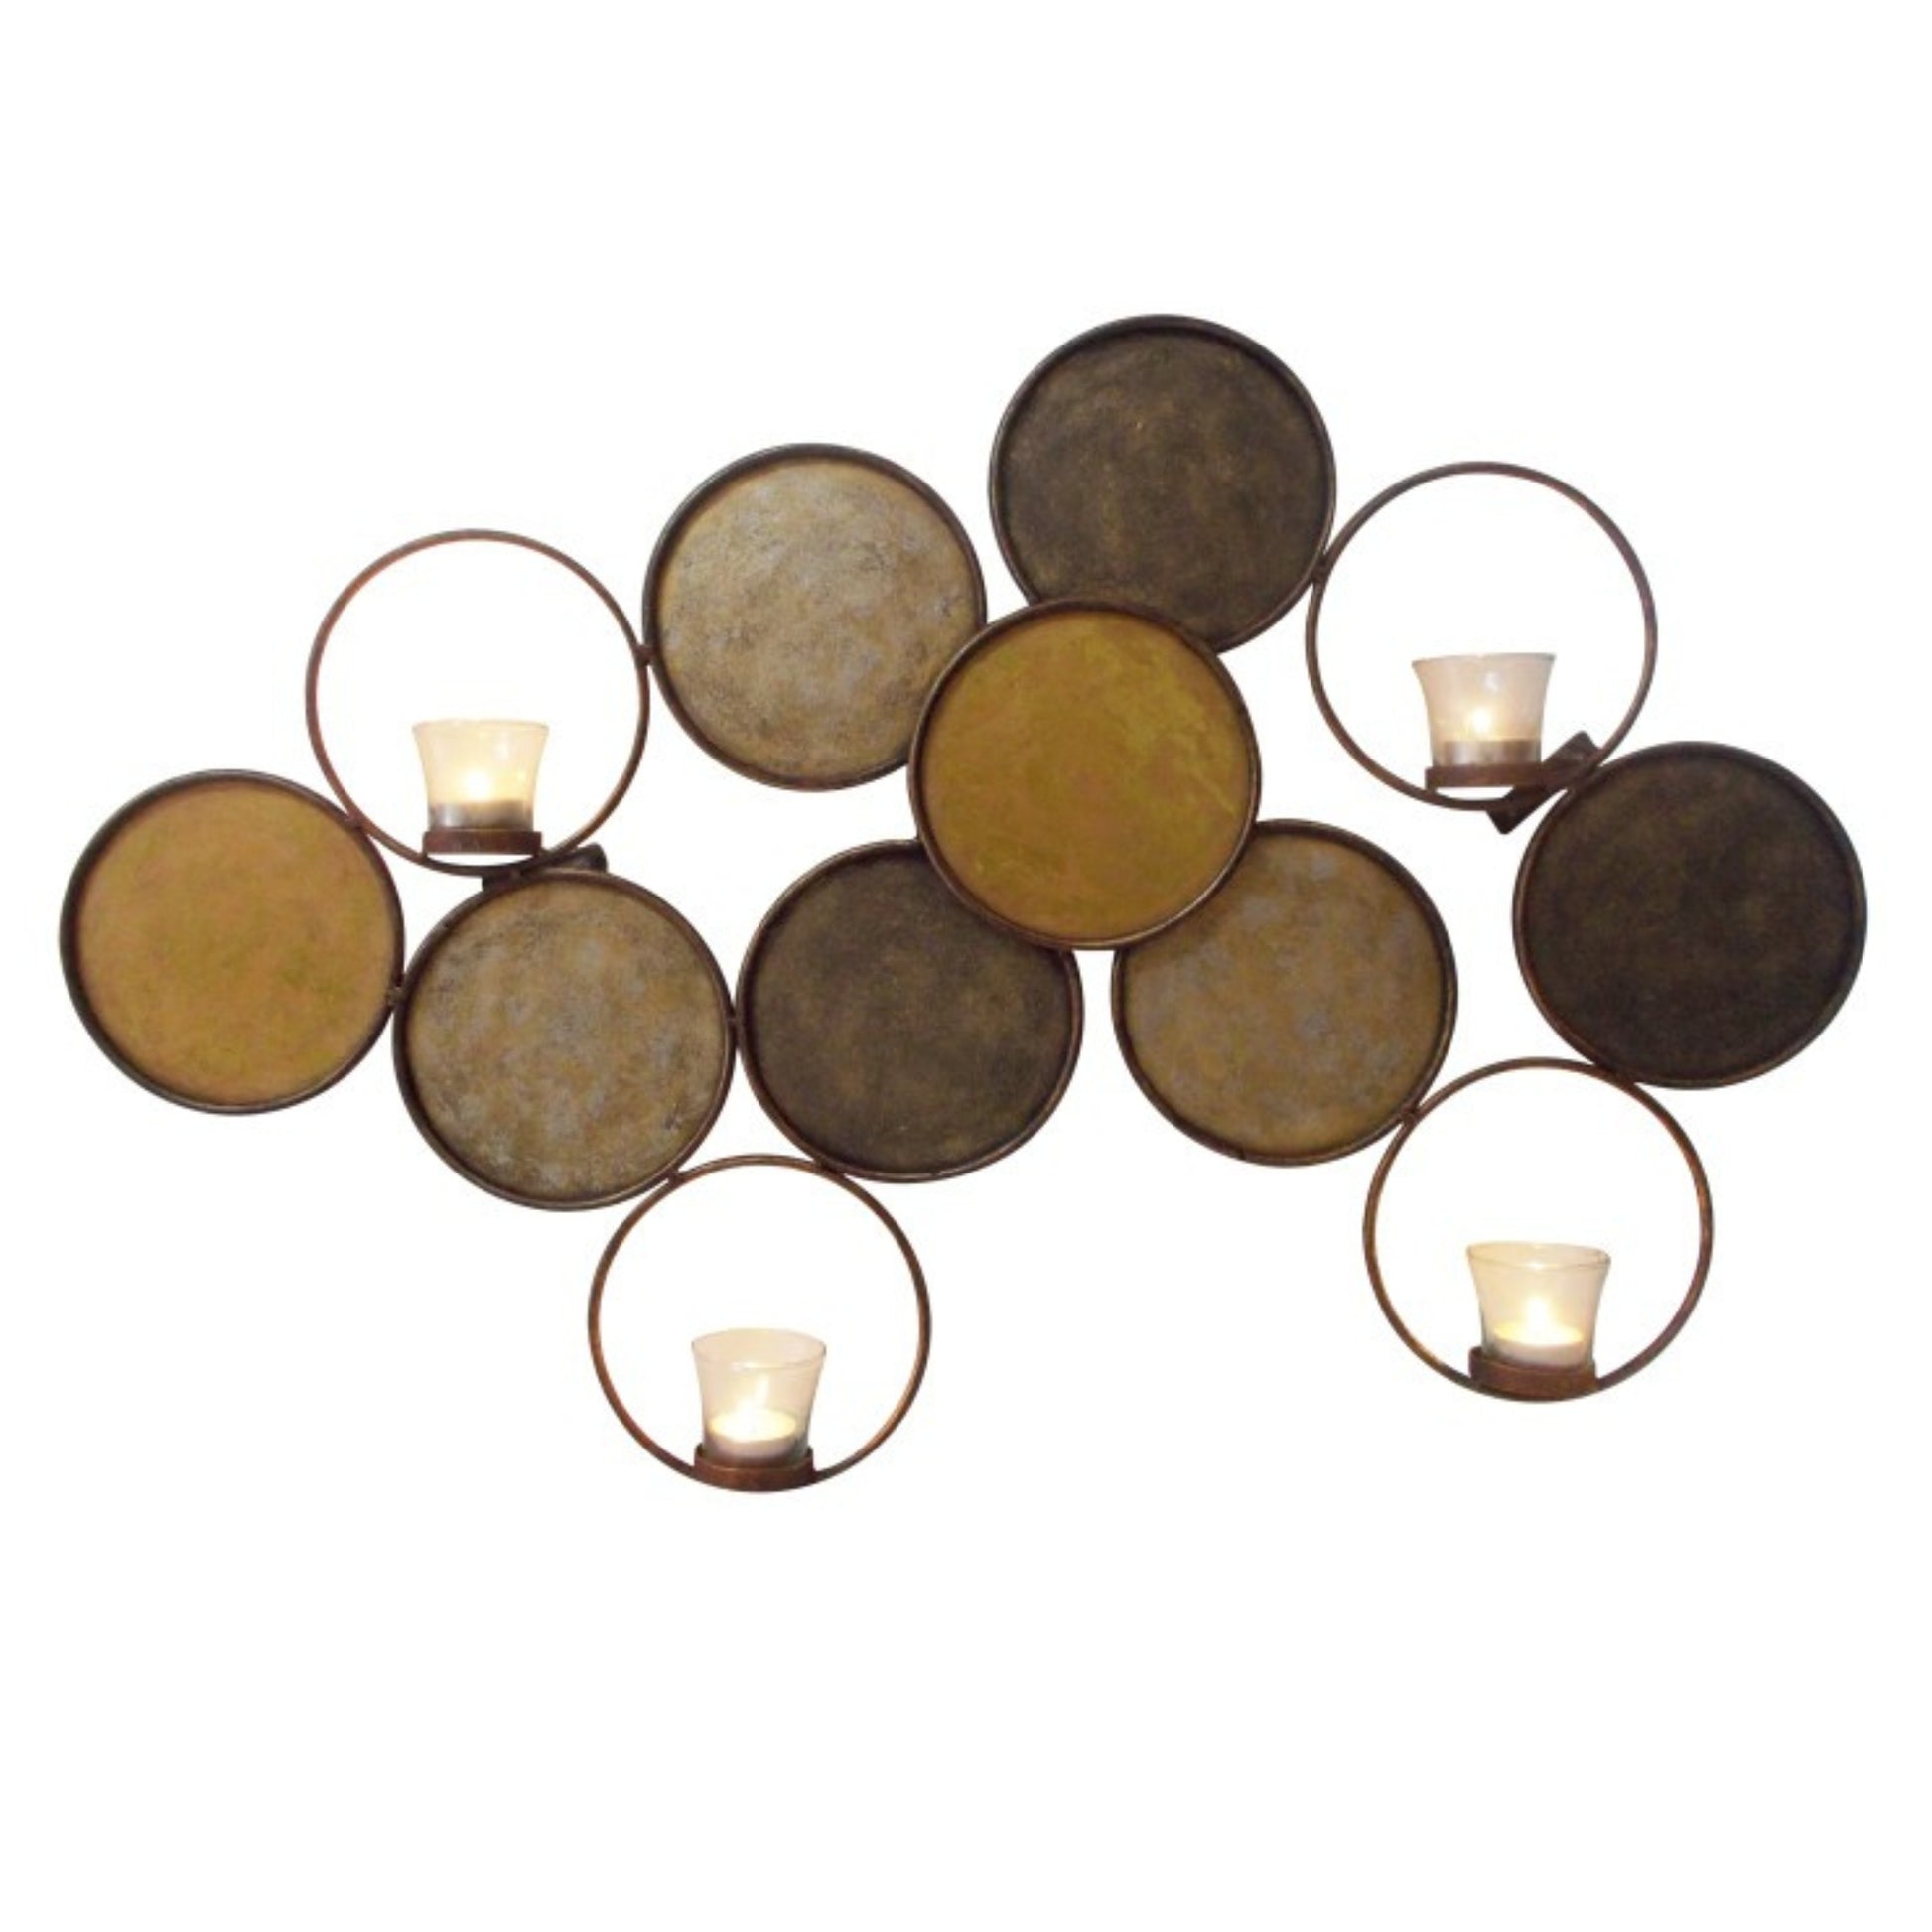 Gold Circle Wall Decor - Four Votive Candle Holder Wall Accent (31"W) | InsideOutCatalog.com